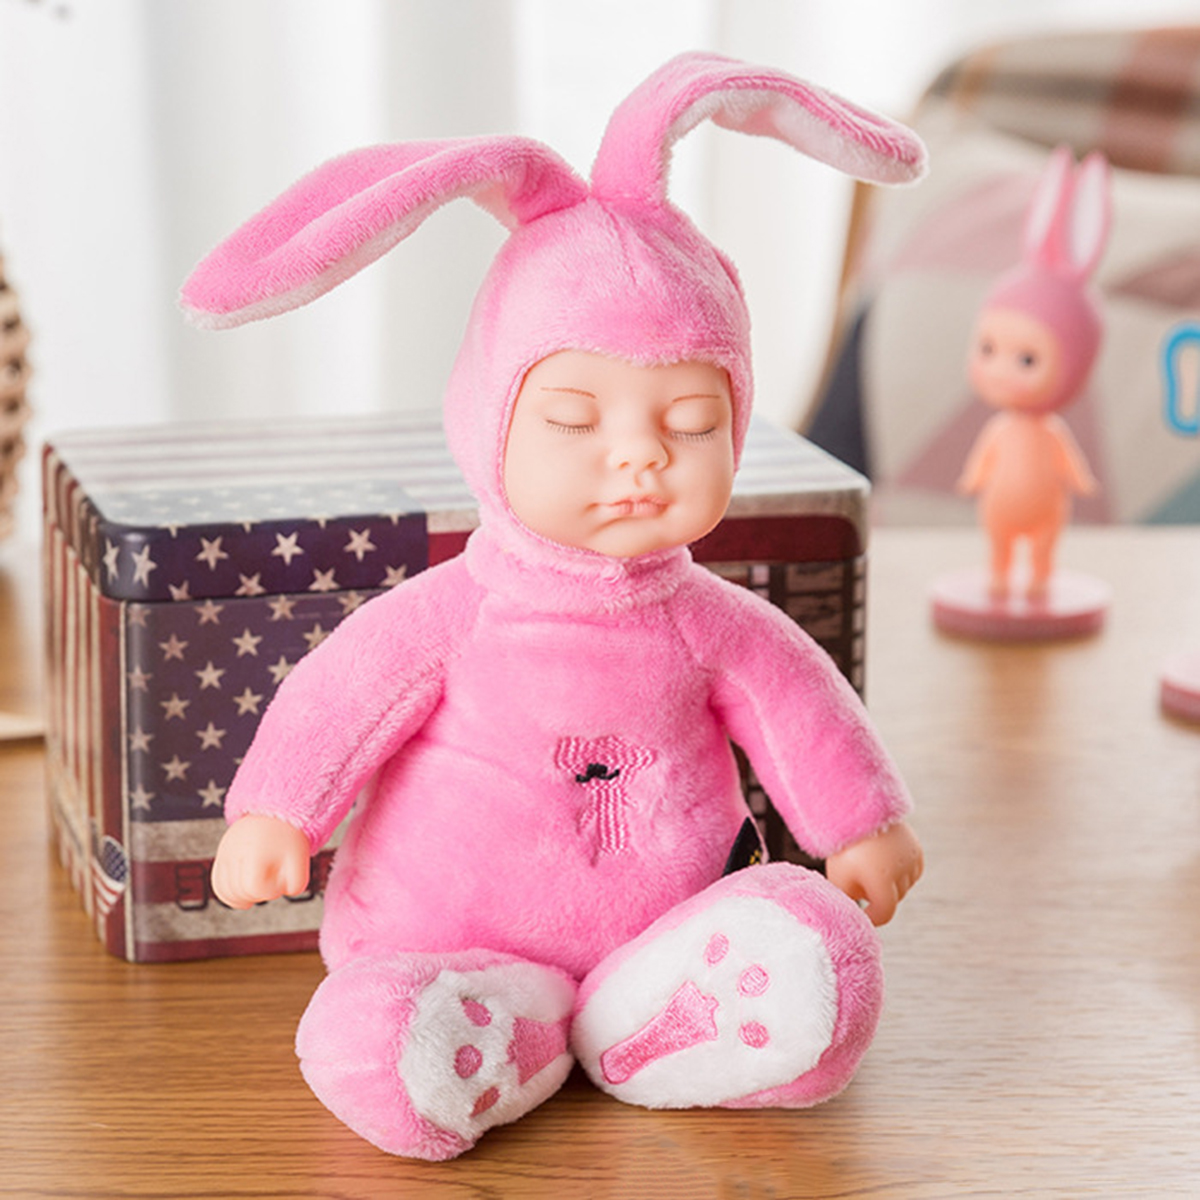 23CM-Soft-Silicone-Vinyl-Lifelike-Realistic-Reborn-Cute-Bear-Rabbit-Doll-Toy-with-Clothes-1722622-9